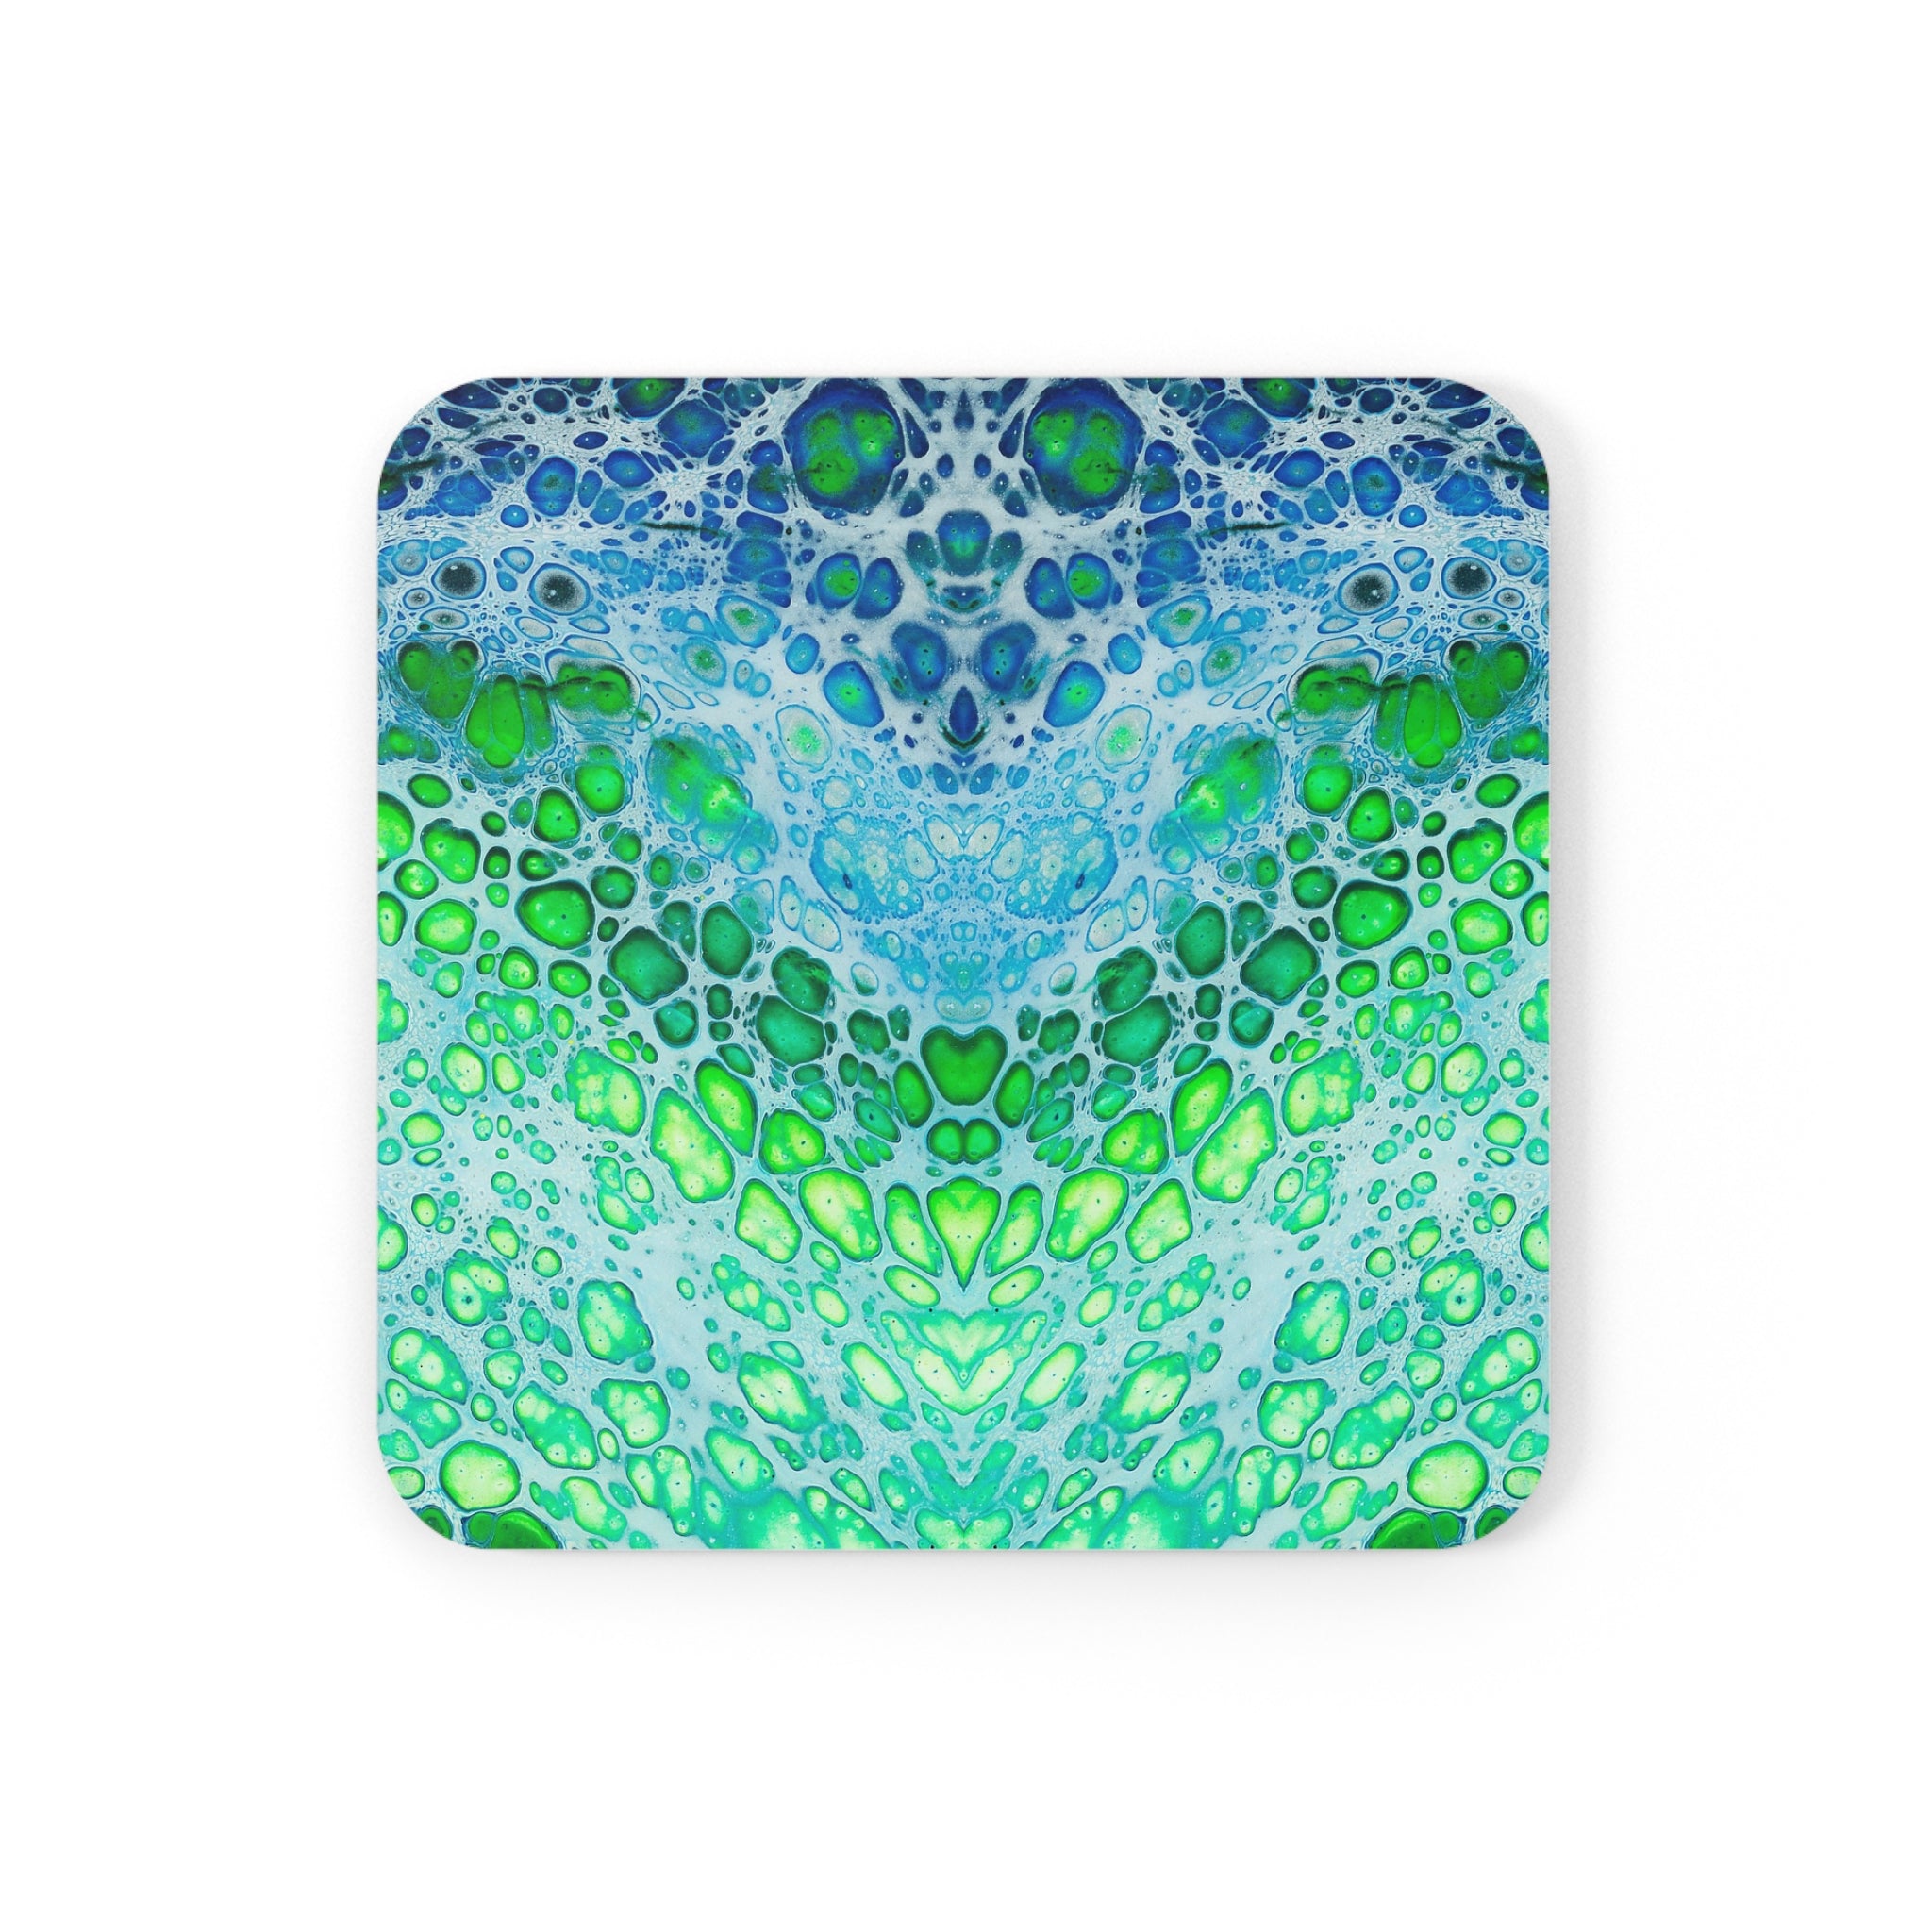 Cameron Creations - Cellonious A - Stylish Coffee Coaster - Square Front